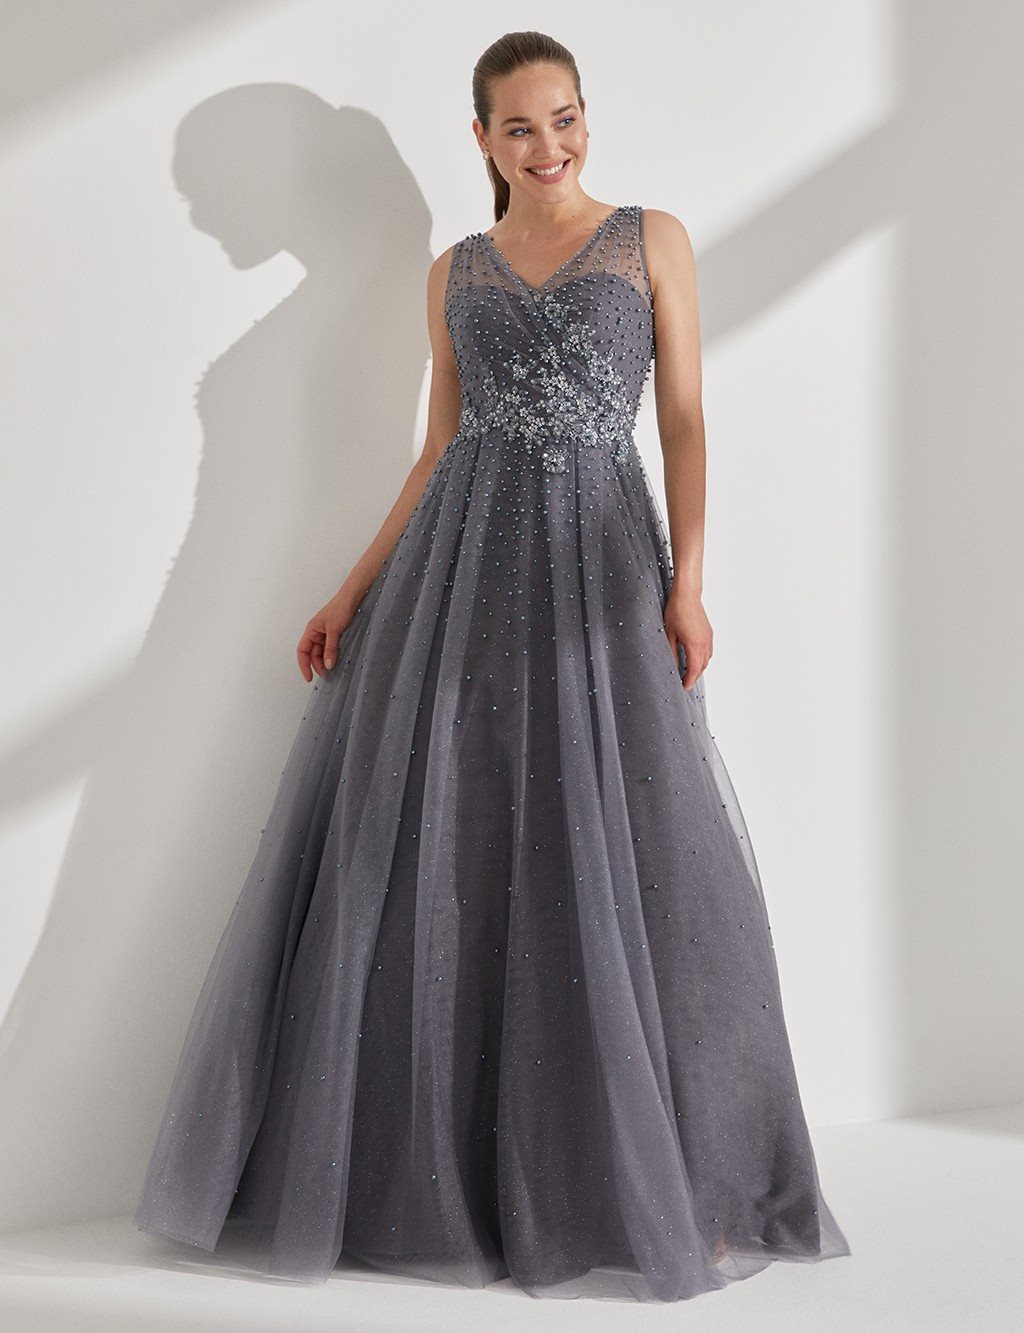 TIARA Tulle Detailed Pearl Embroidered Evening Dress B20 26170 Blue Granite